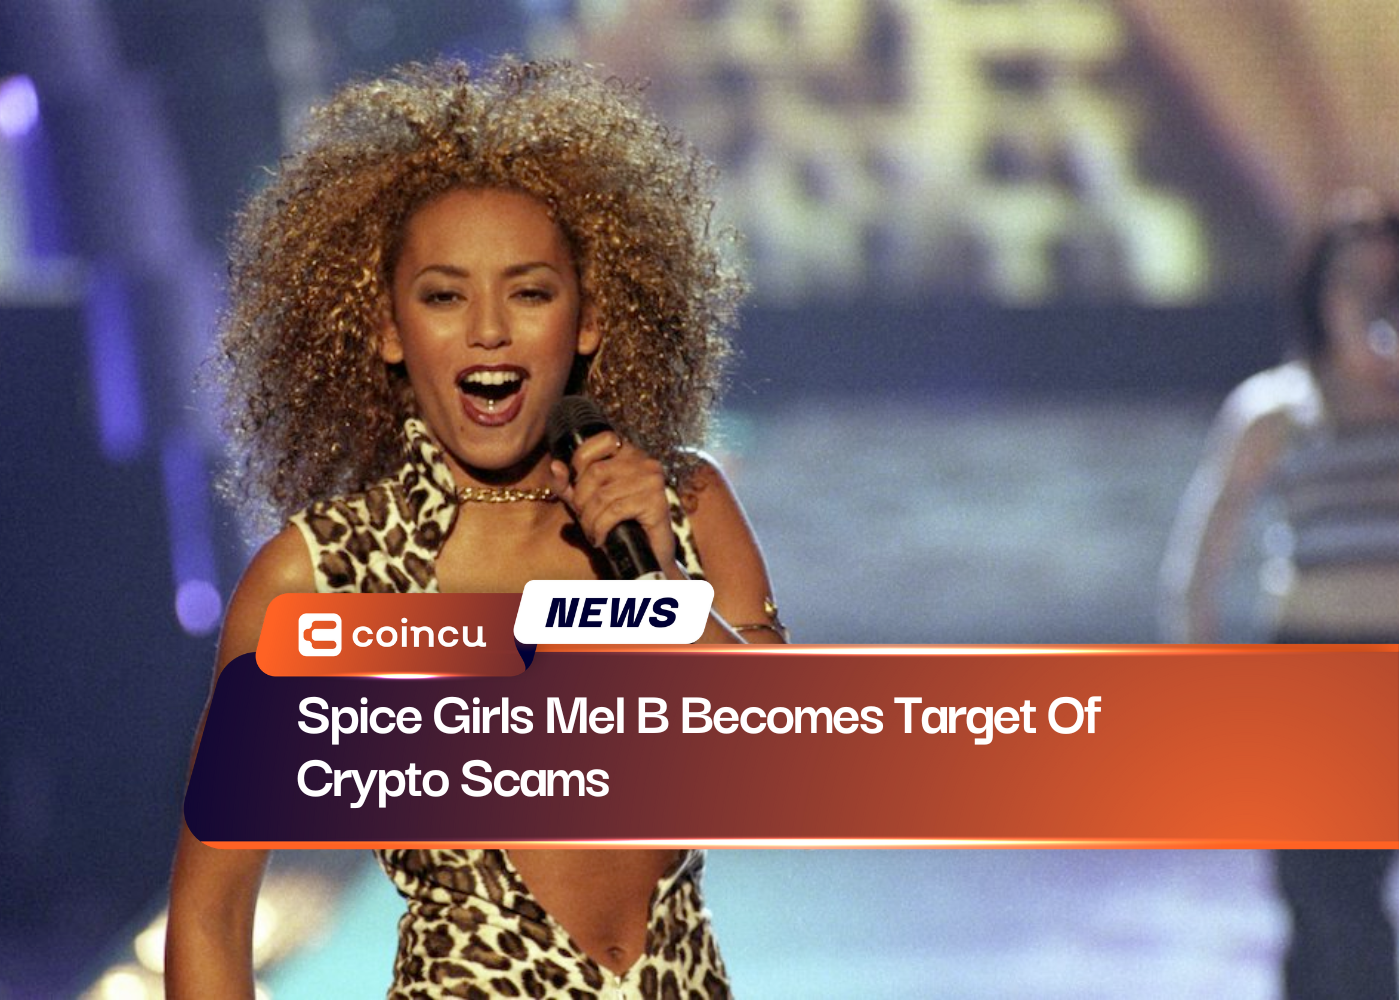 Spice Girls Mel B Becomes Target OSpice Girls Mel B Becomes Target Of Spice Girls Mel B Becomes Target Of Crypto Scams Scamsf Crypto Scams